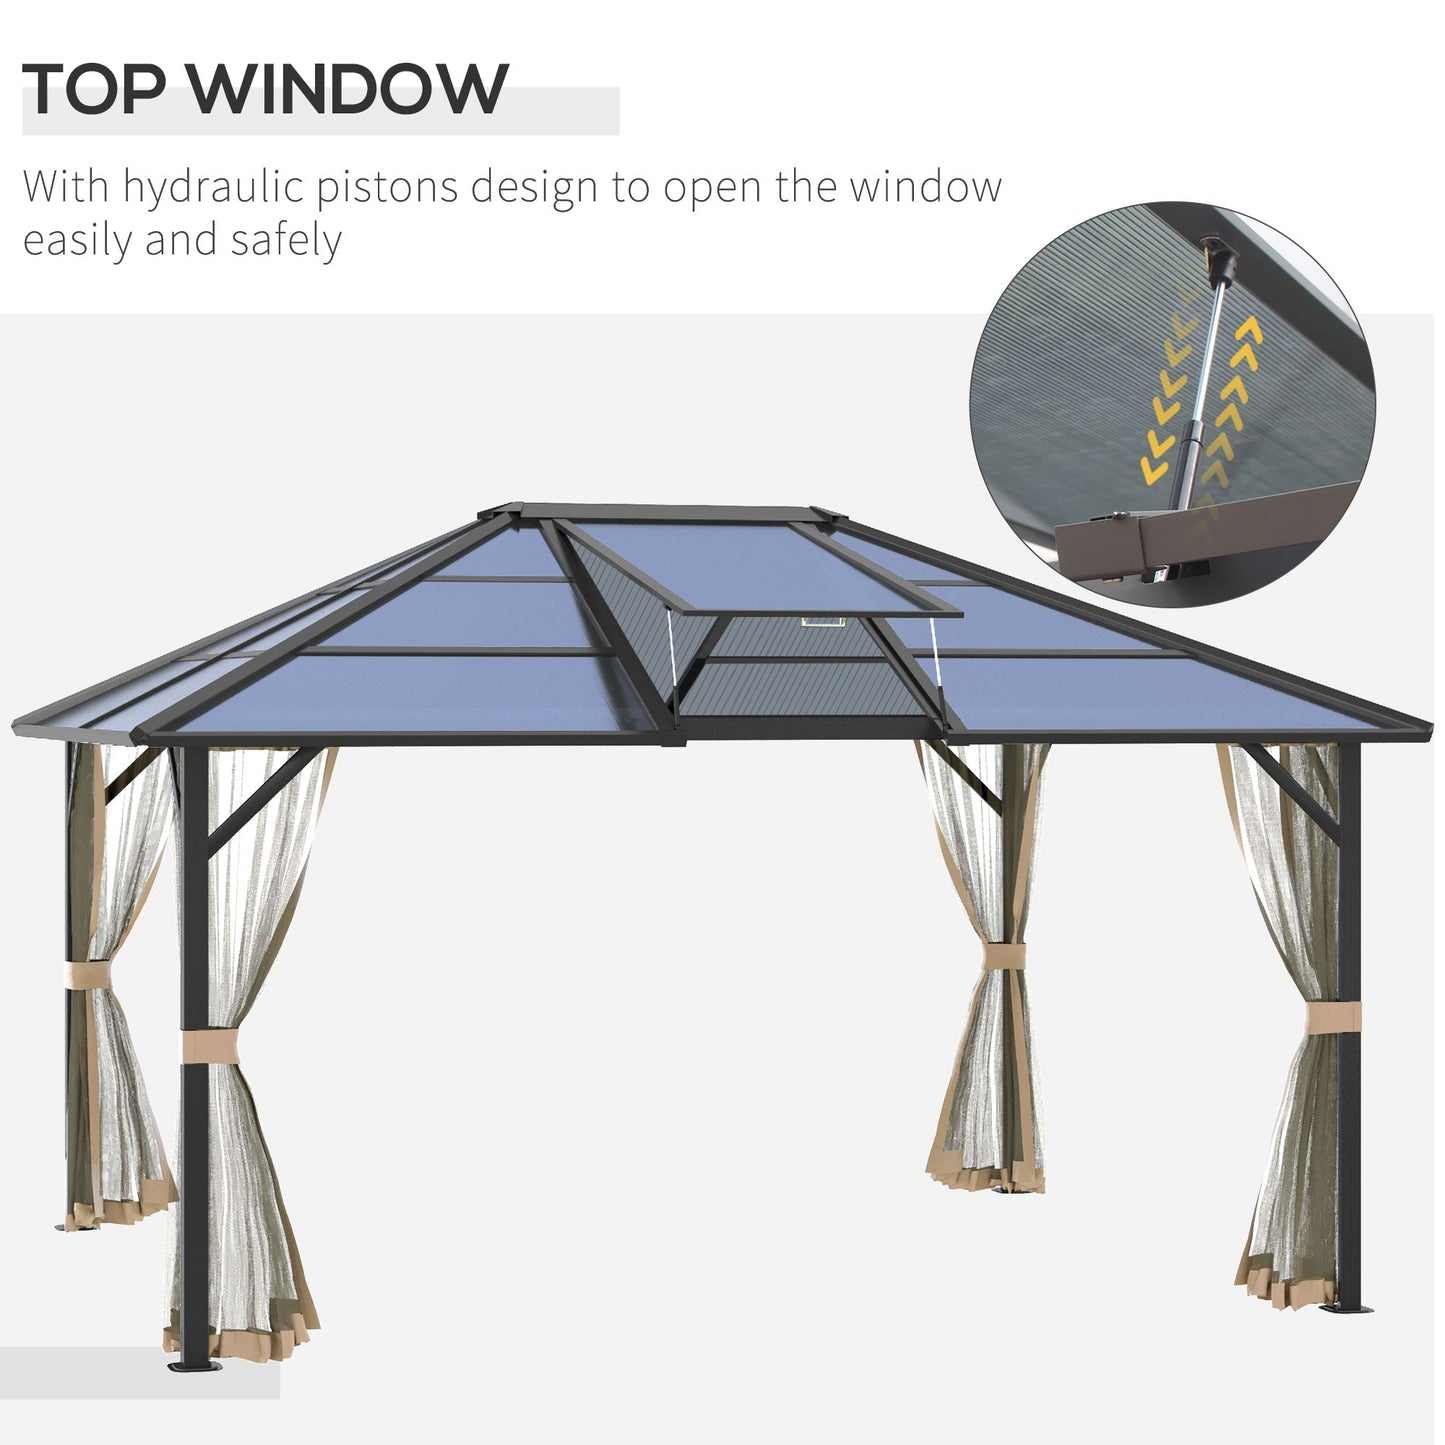 Outdoor and Garden-14' x 12' Hardtop Polycarbonate Gazebo Canopy Aluminum Frame Pergola with Top Vent and Netting for Garden, Patio, Grey - Outdoor Style Company